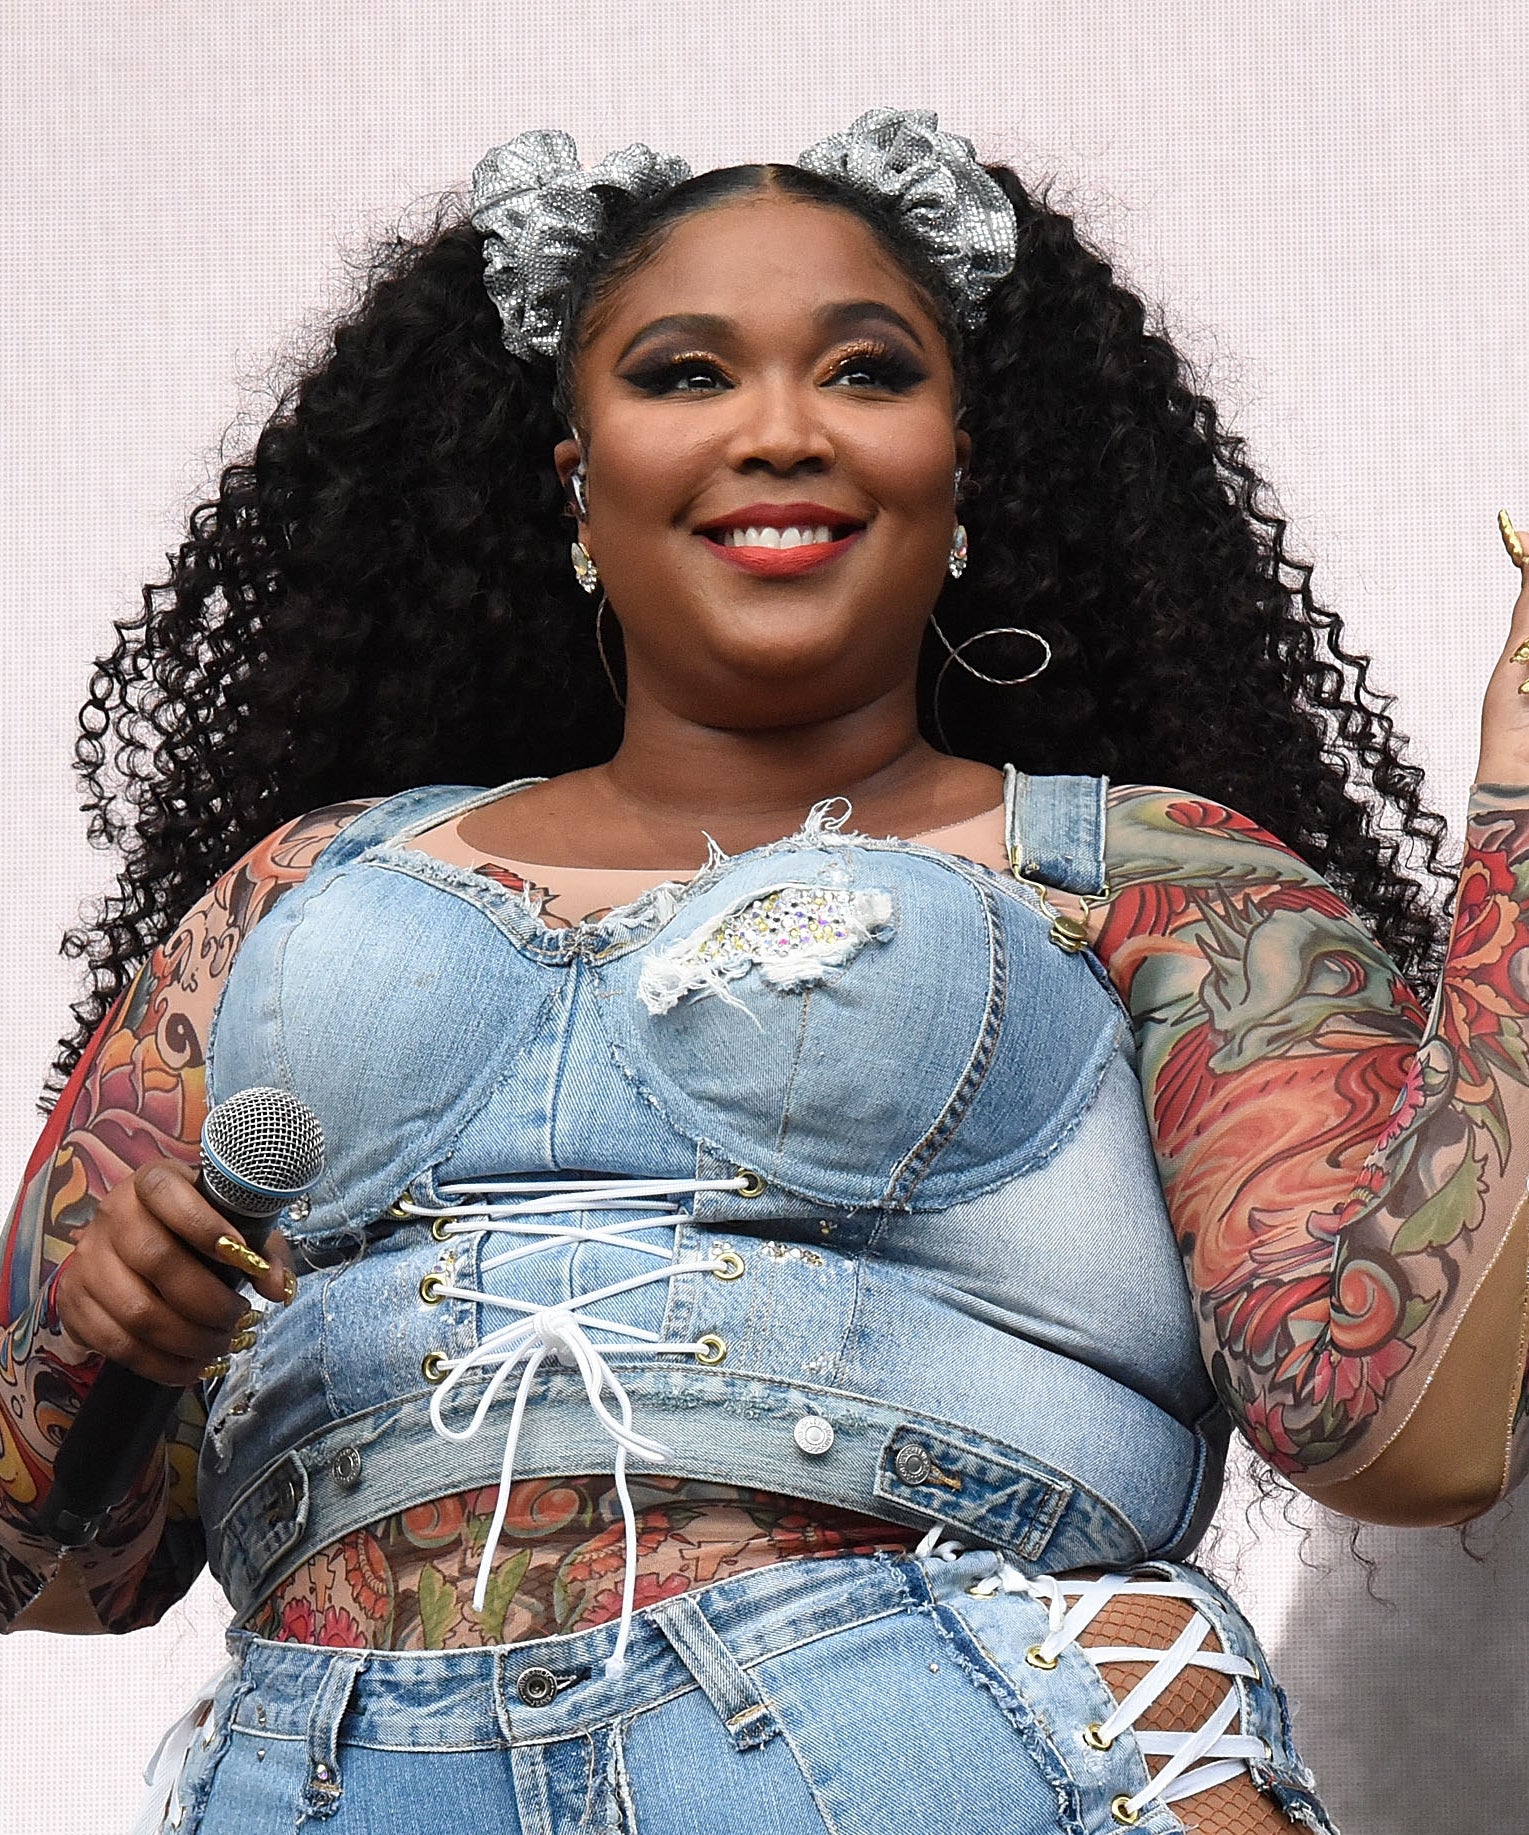 Lizzo's Workout Outfit Has A Canadian Connection